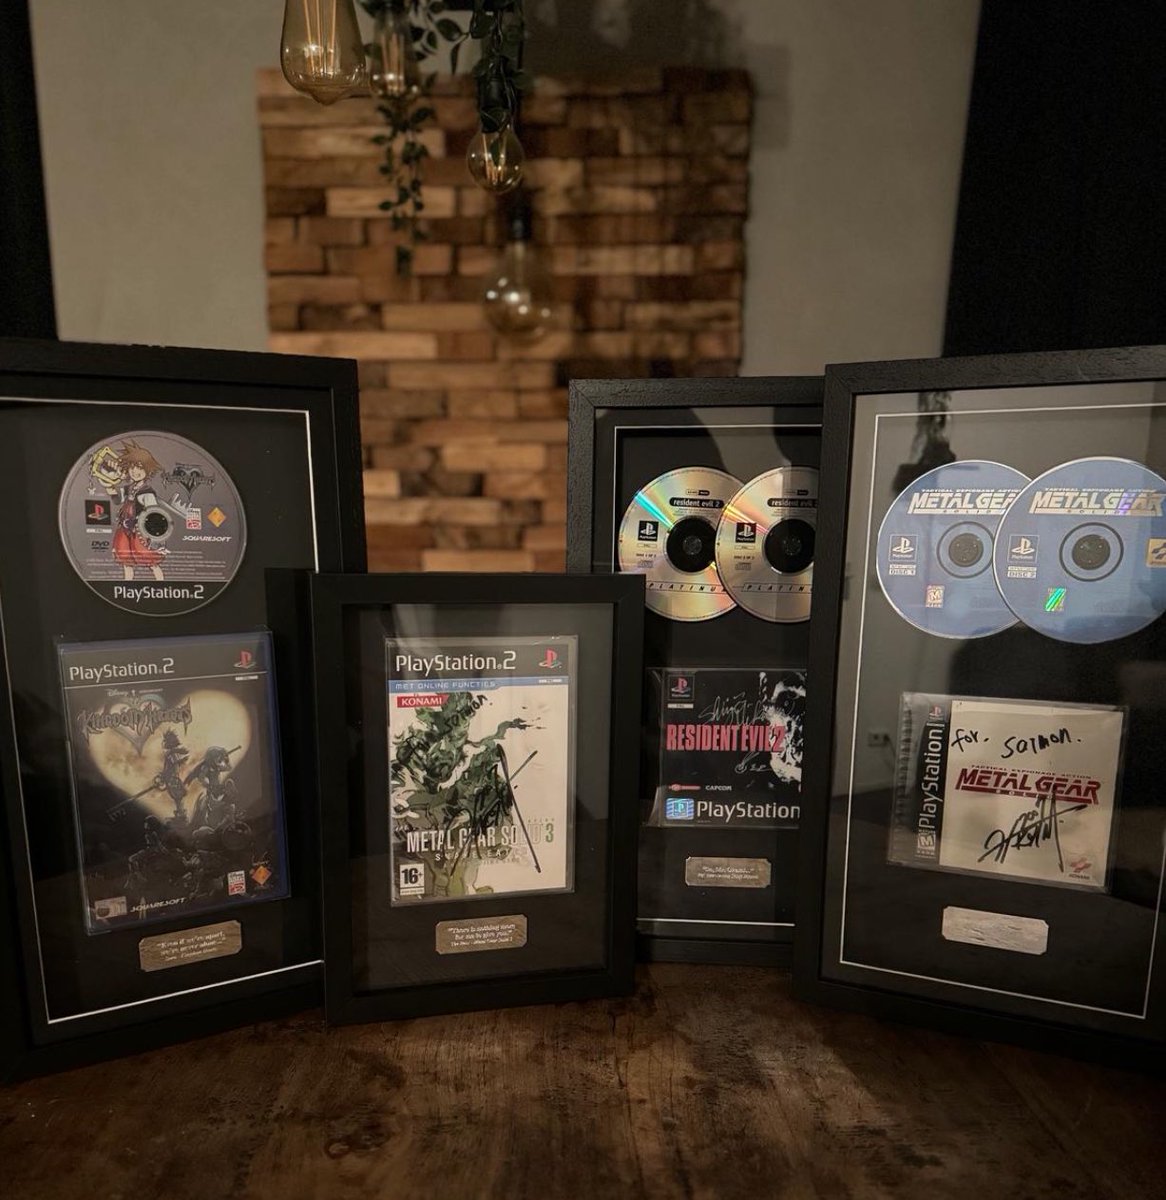 Came for the free frame, stayed for buying three more. Had to give some love to my signed Resident Evil 2 and signed Metal Gear copies. And Kingdom Hearts for my boy. ‘Even if we’re apart, we’re never alone anymore’ Thanks @FrameAGame ⭐️⭐️⭐️⭐️⭐️